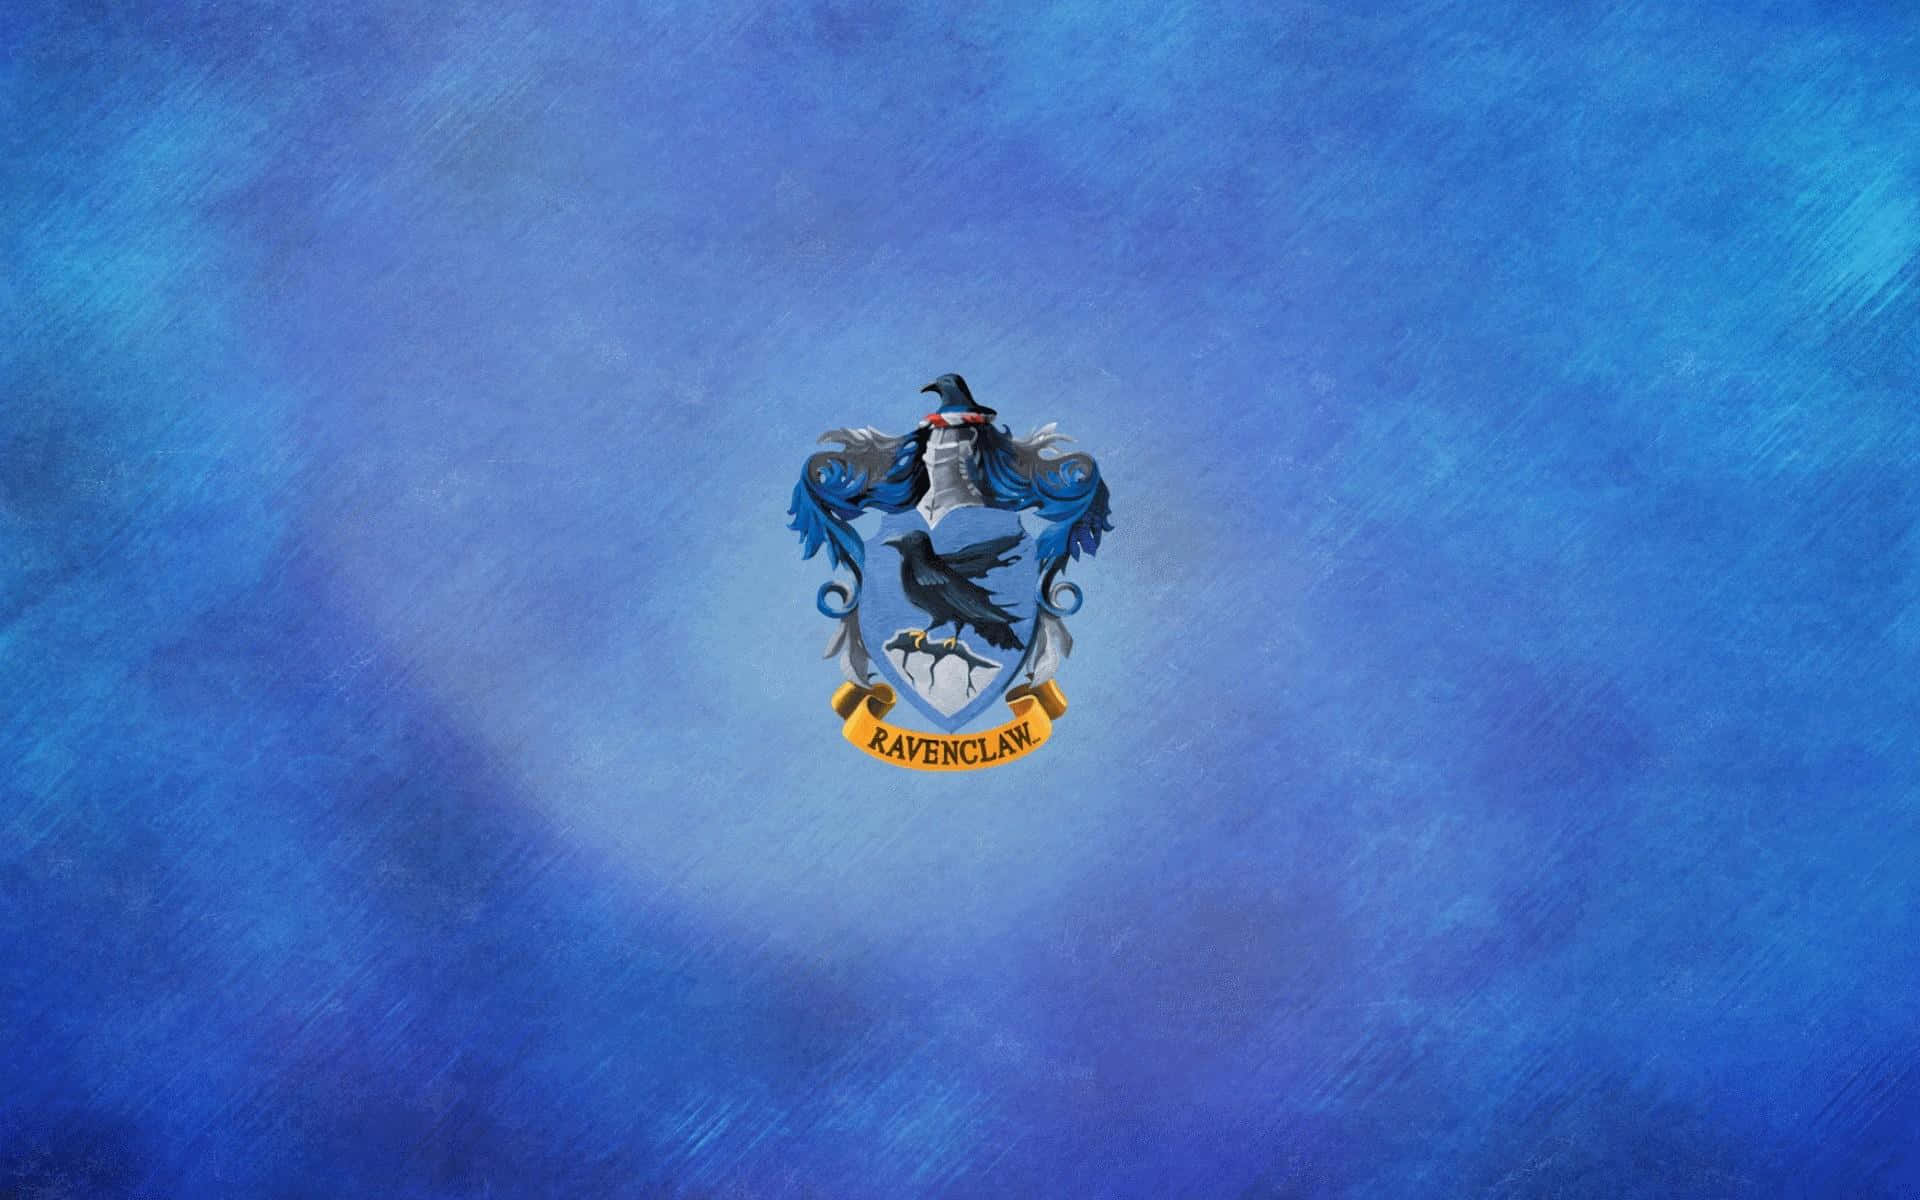 "Everyday magic starts with being a Ravenclaw." Wallpaper